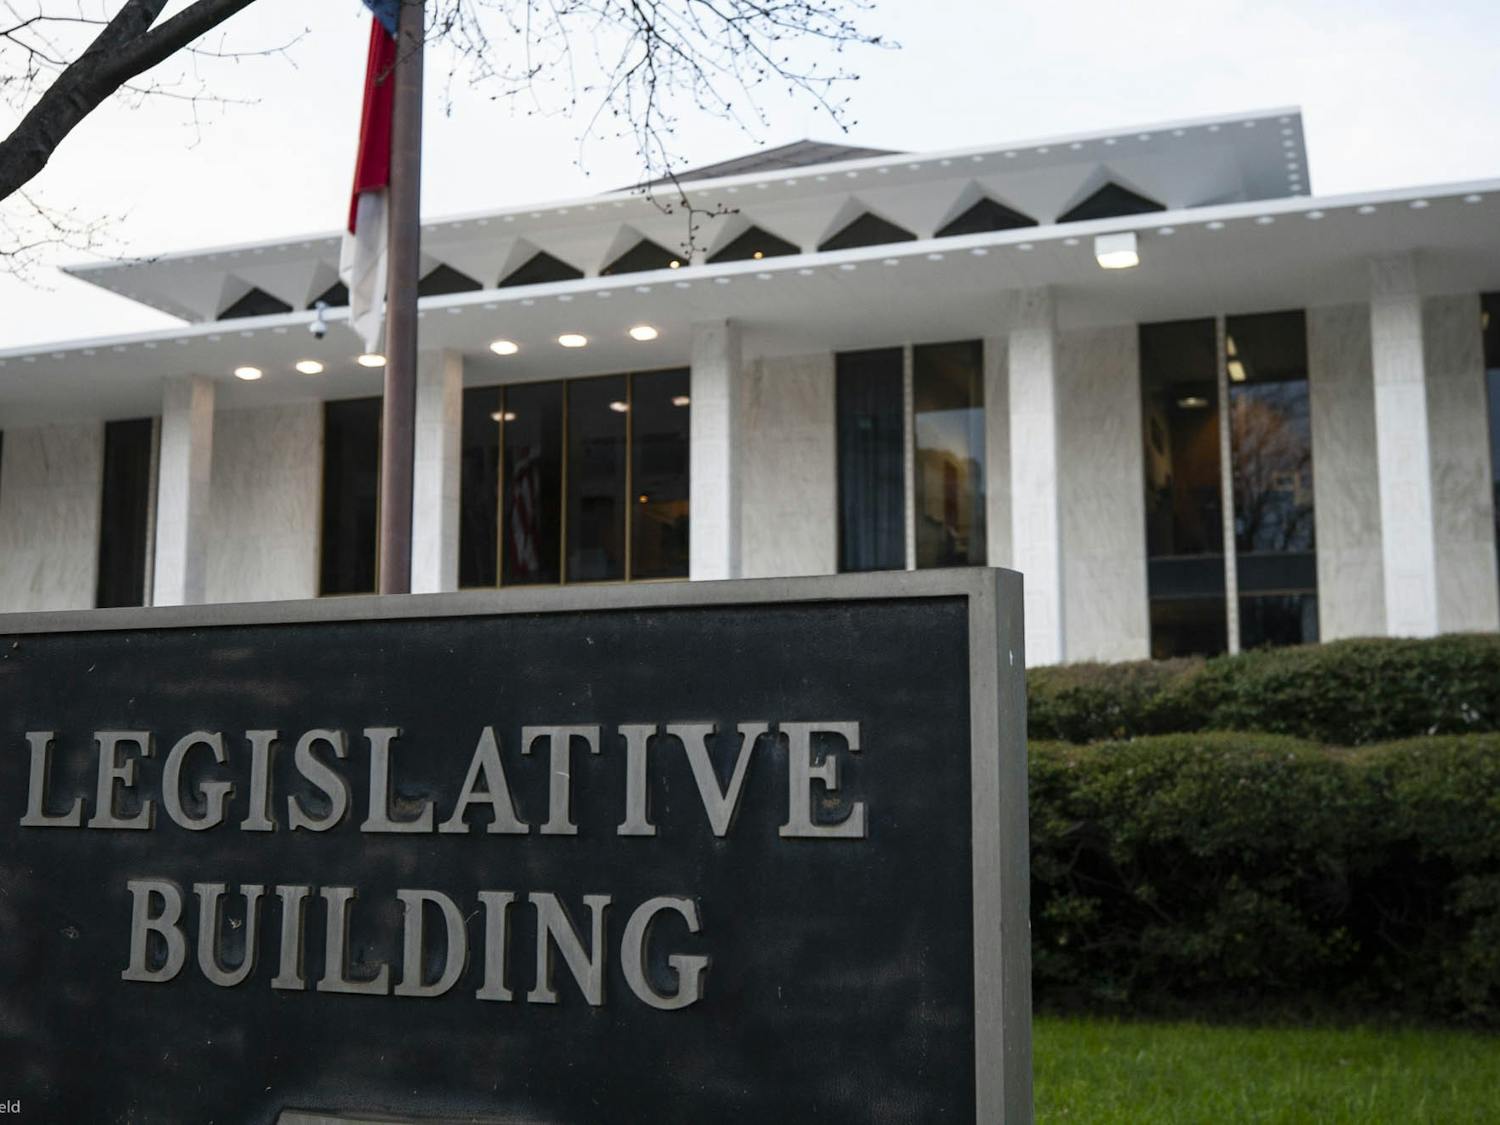 North Carolina General Assembly building in Raleigh on Wednesday, Jan. 29, 2020.